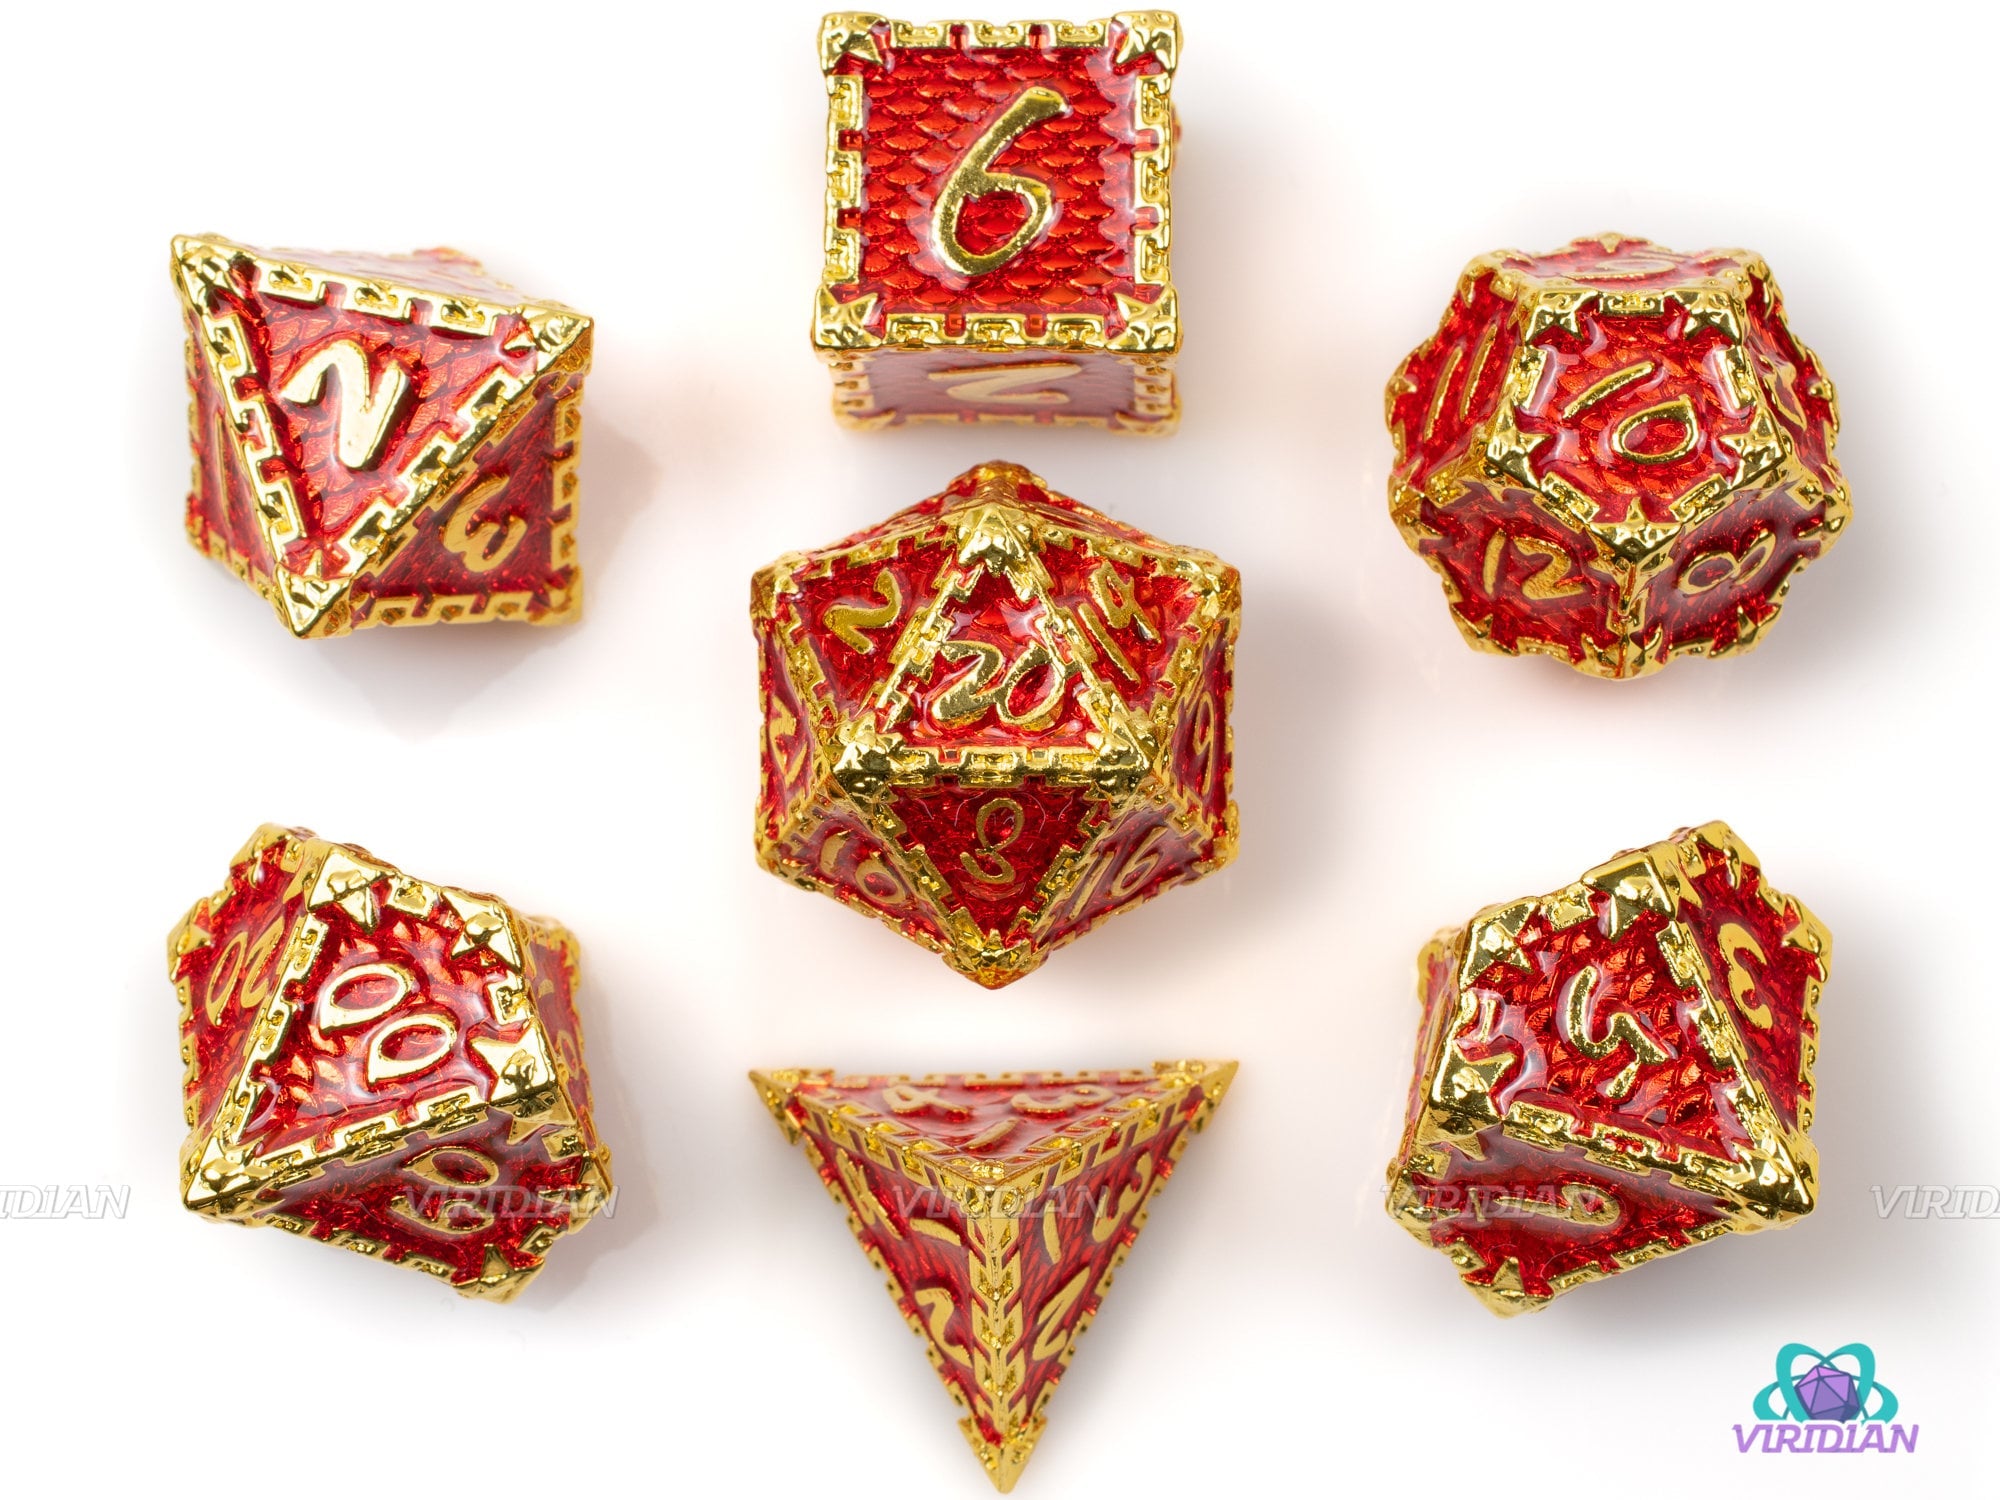 Ken's Vengeance | Red Scales with Gold Chain Design | Oversized Metal Dice Set (7) | D&D Dnd TTRPG